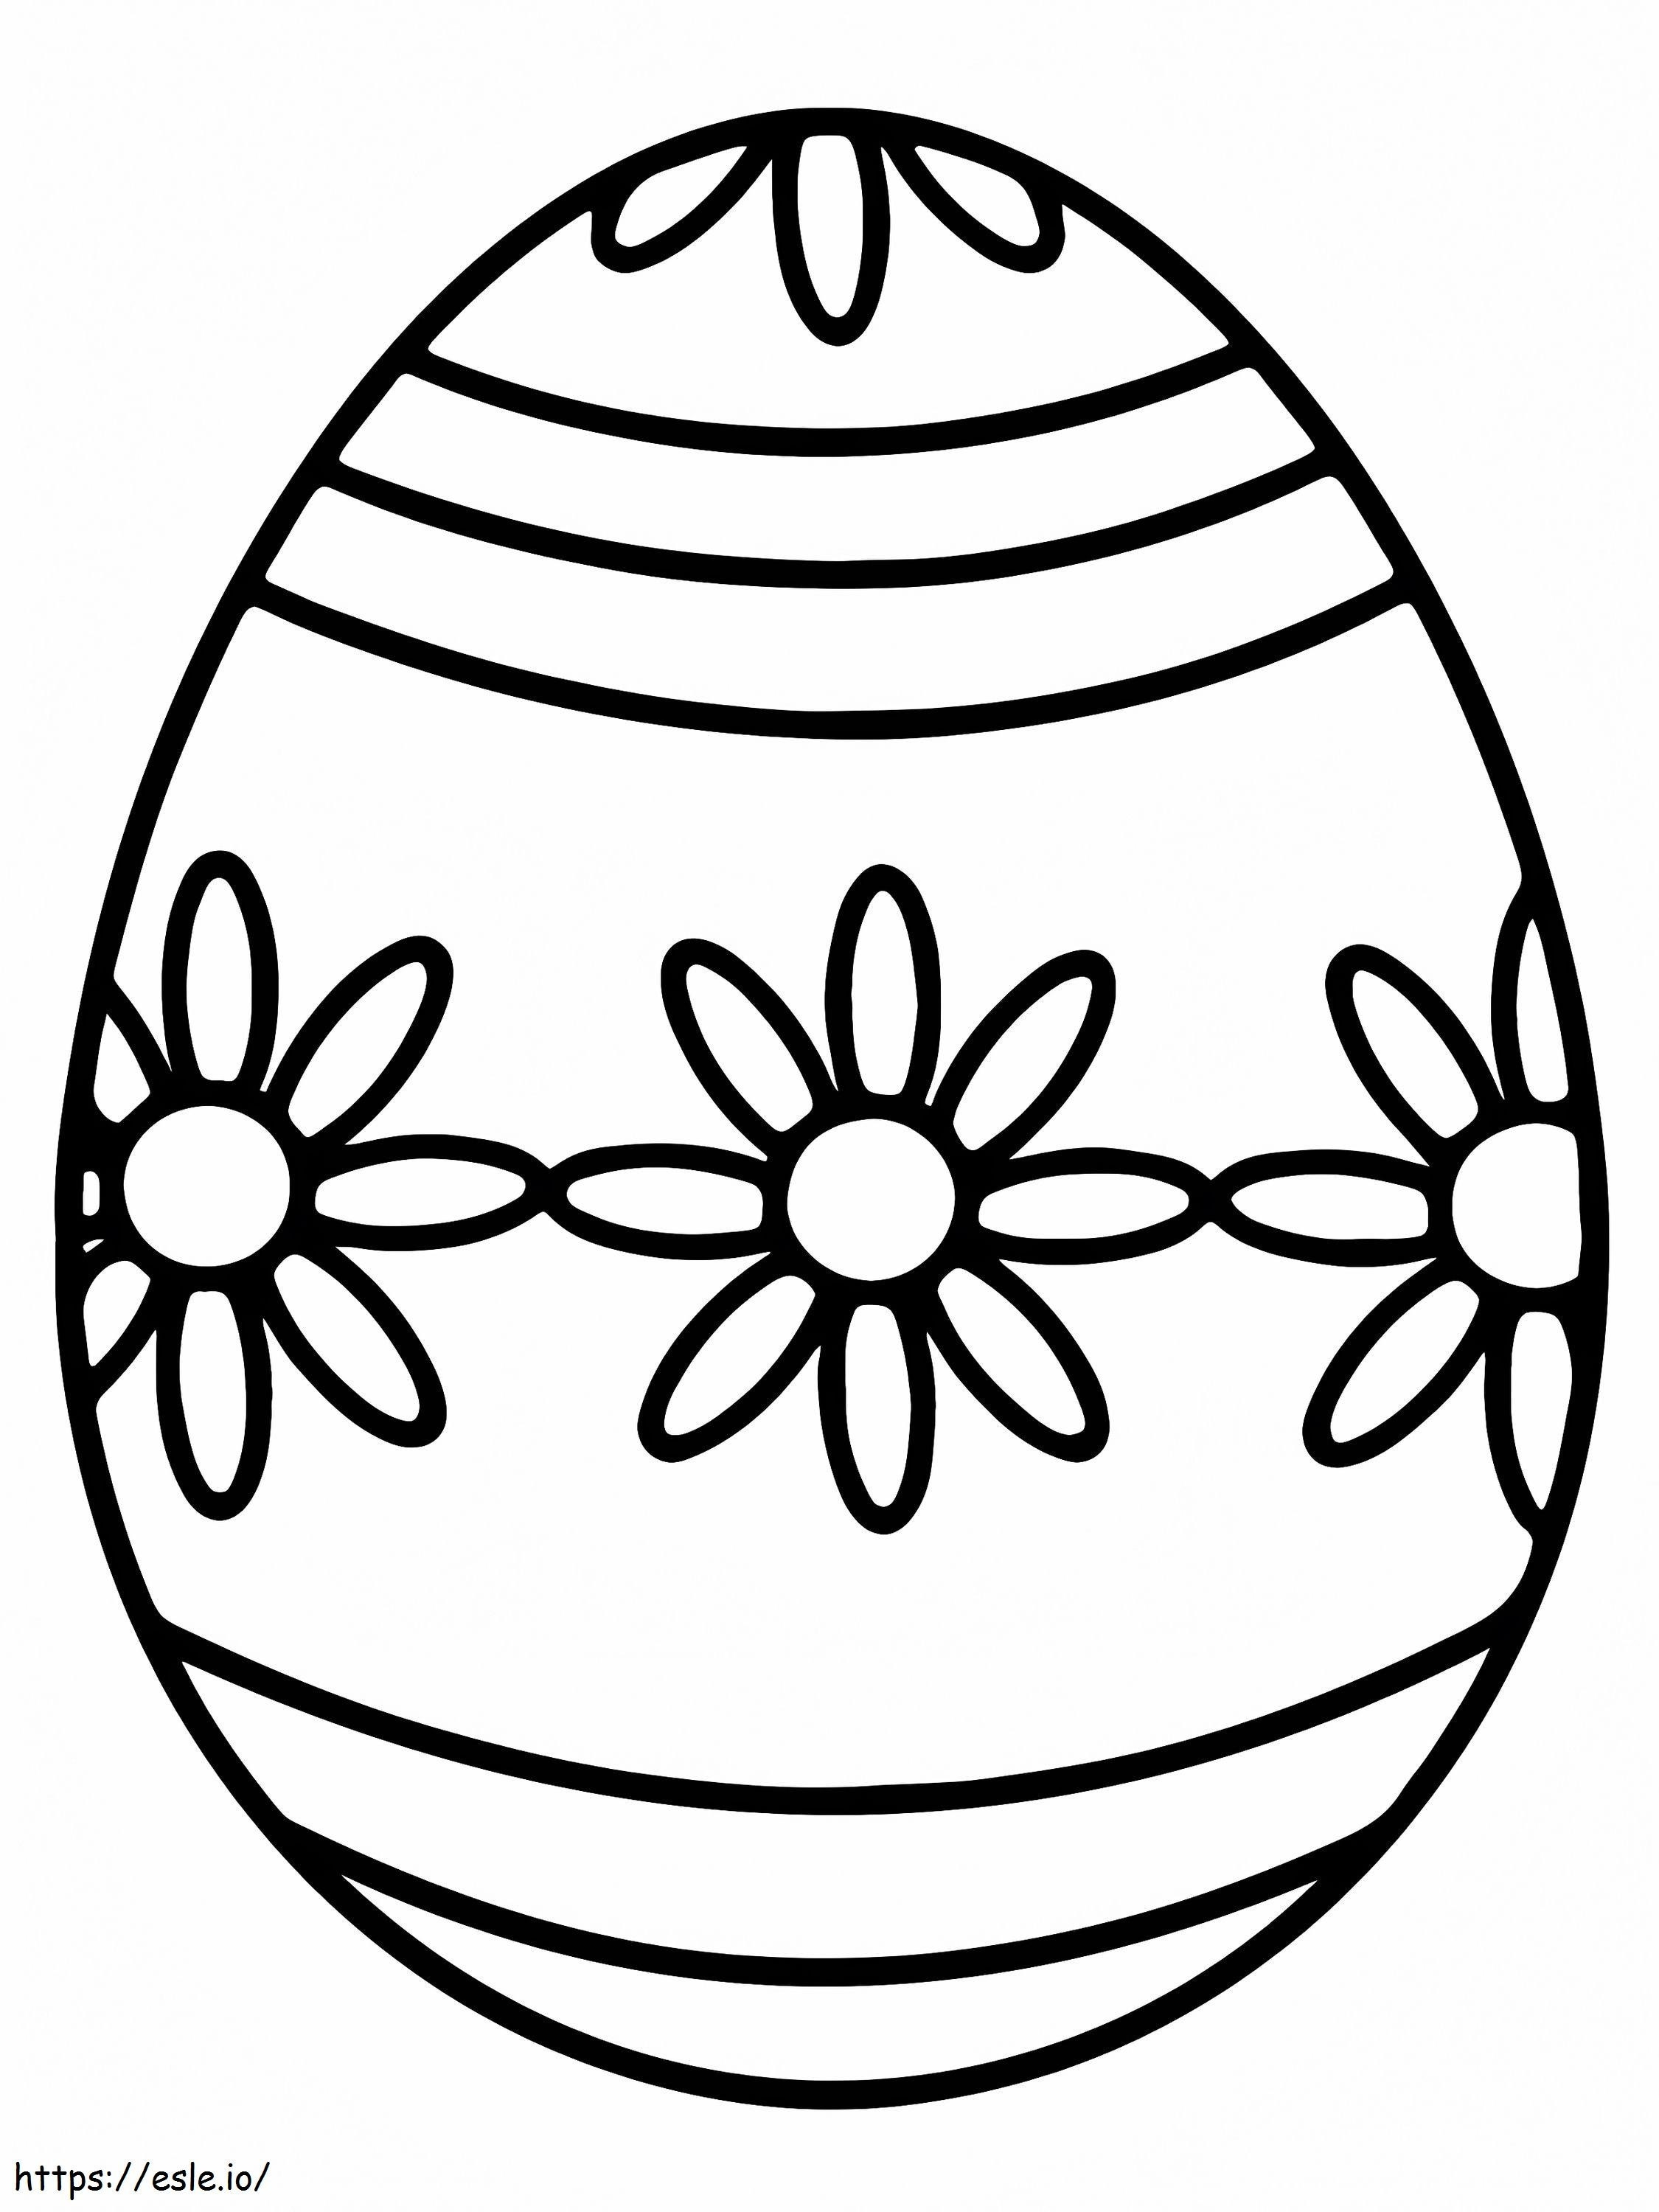 Simple Design Easter Egg Coloring Page